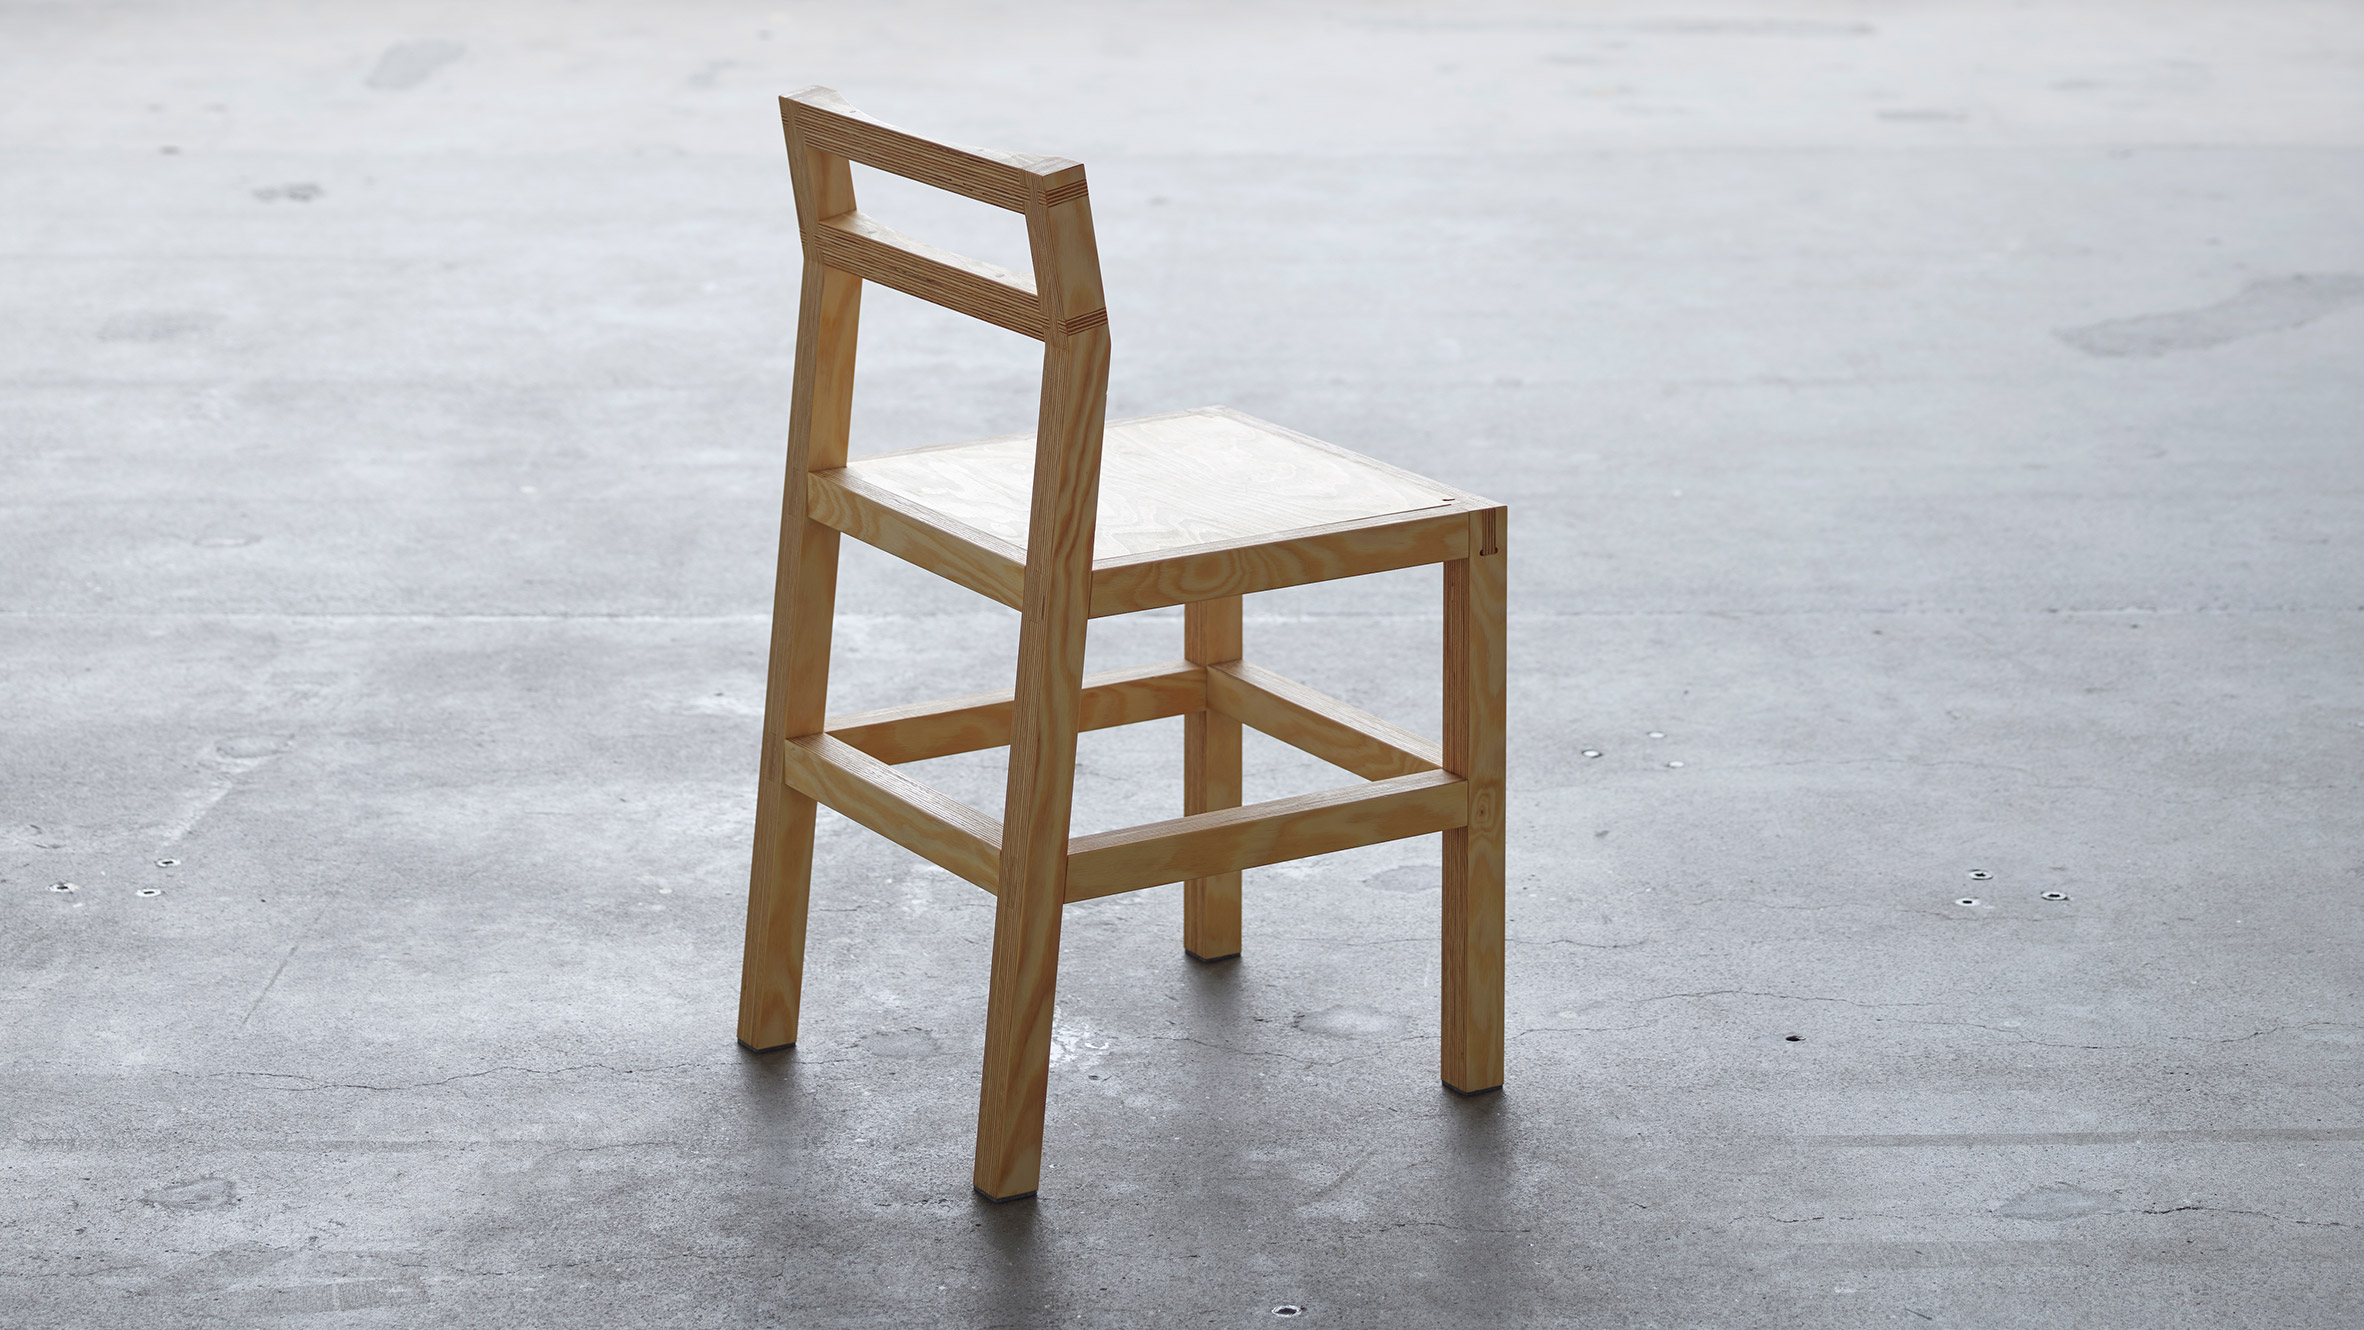 Chair 02 by Archival Studies in the Mindcraft exhibition